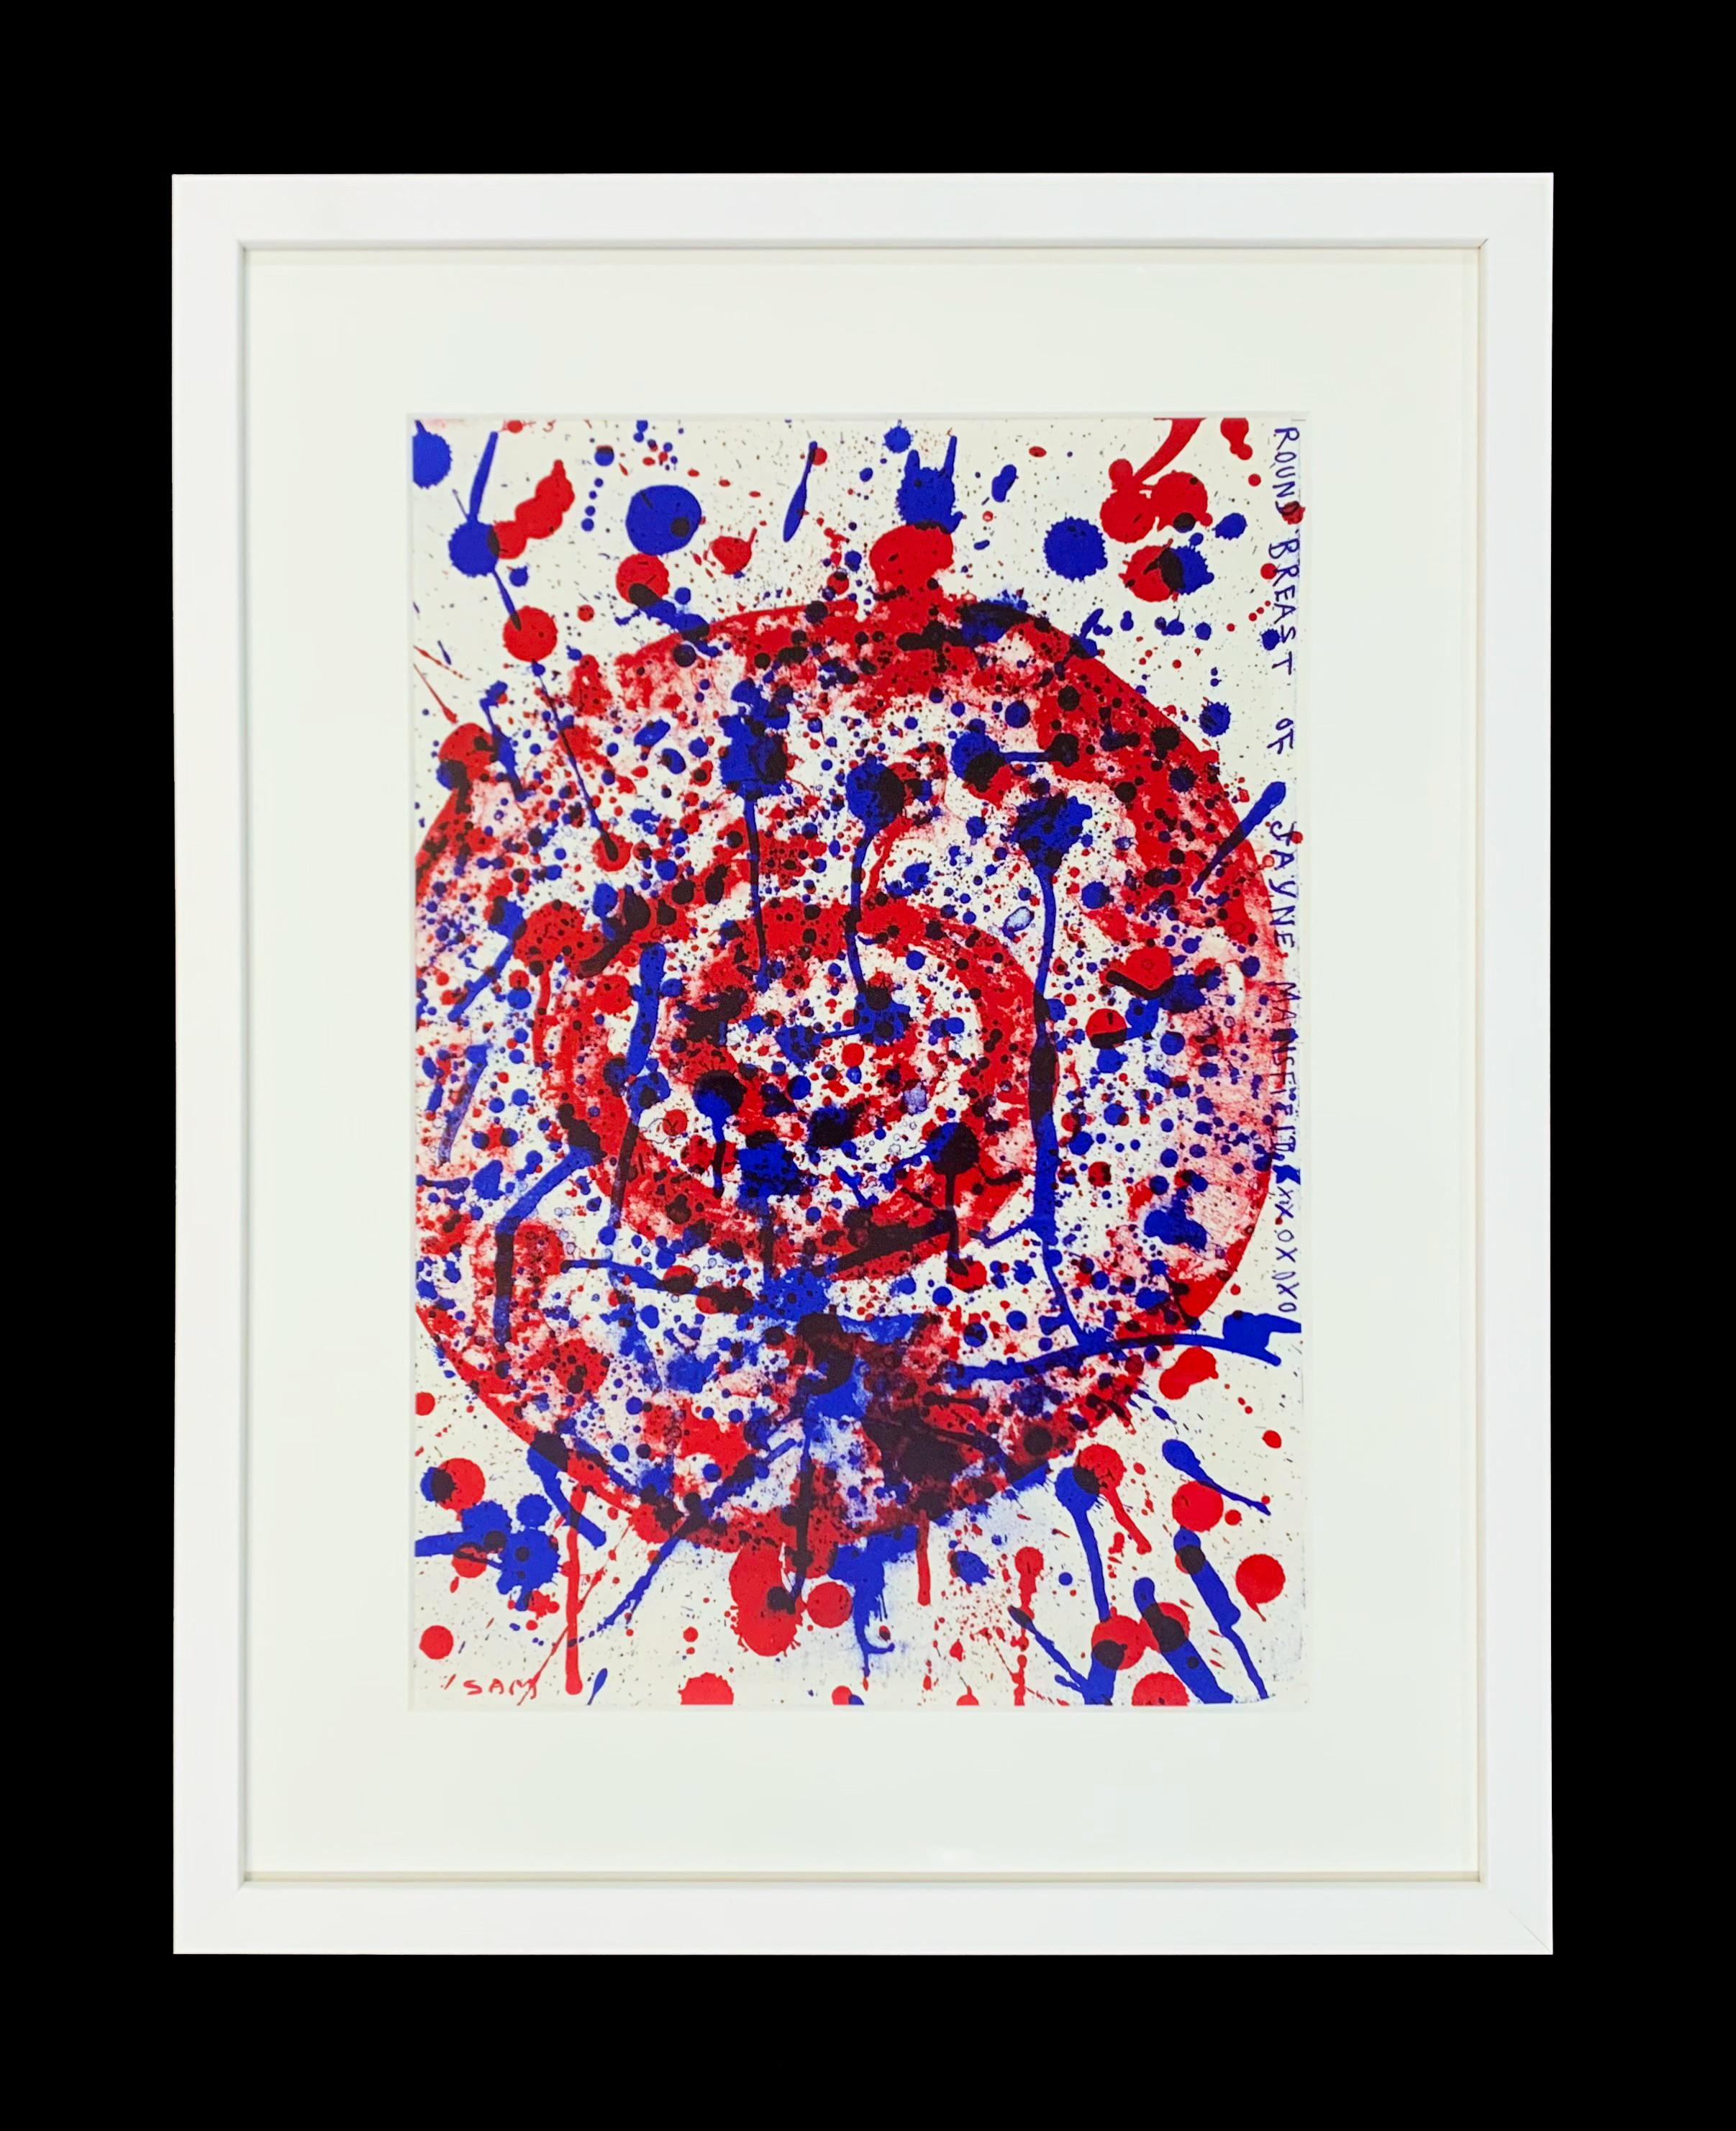 Round Breast of Jane Mansfield - Print by Sam Francis